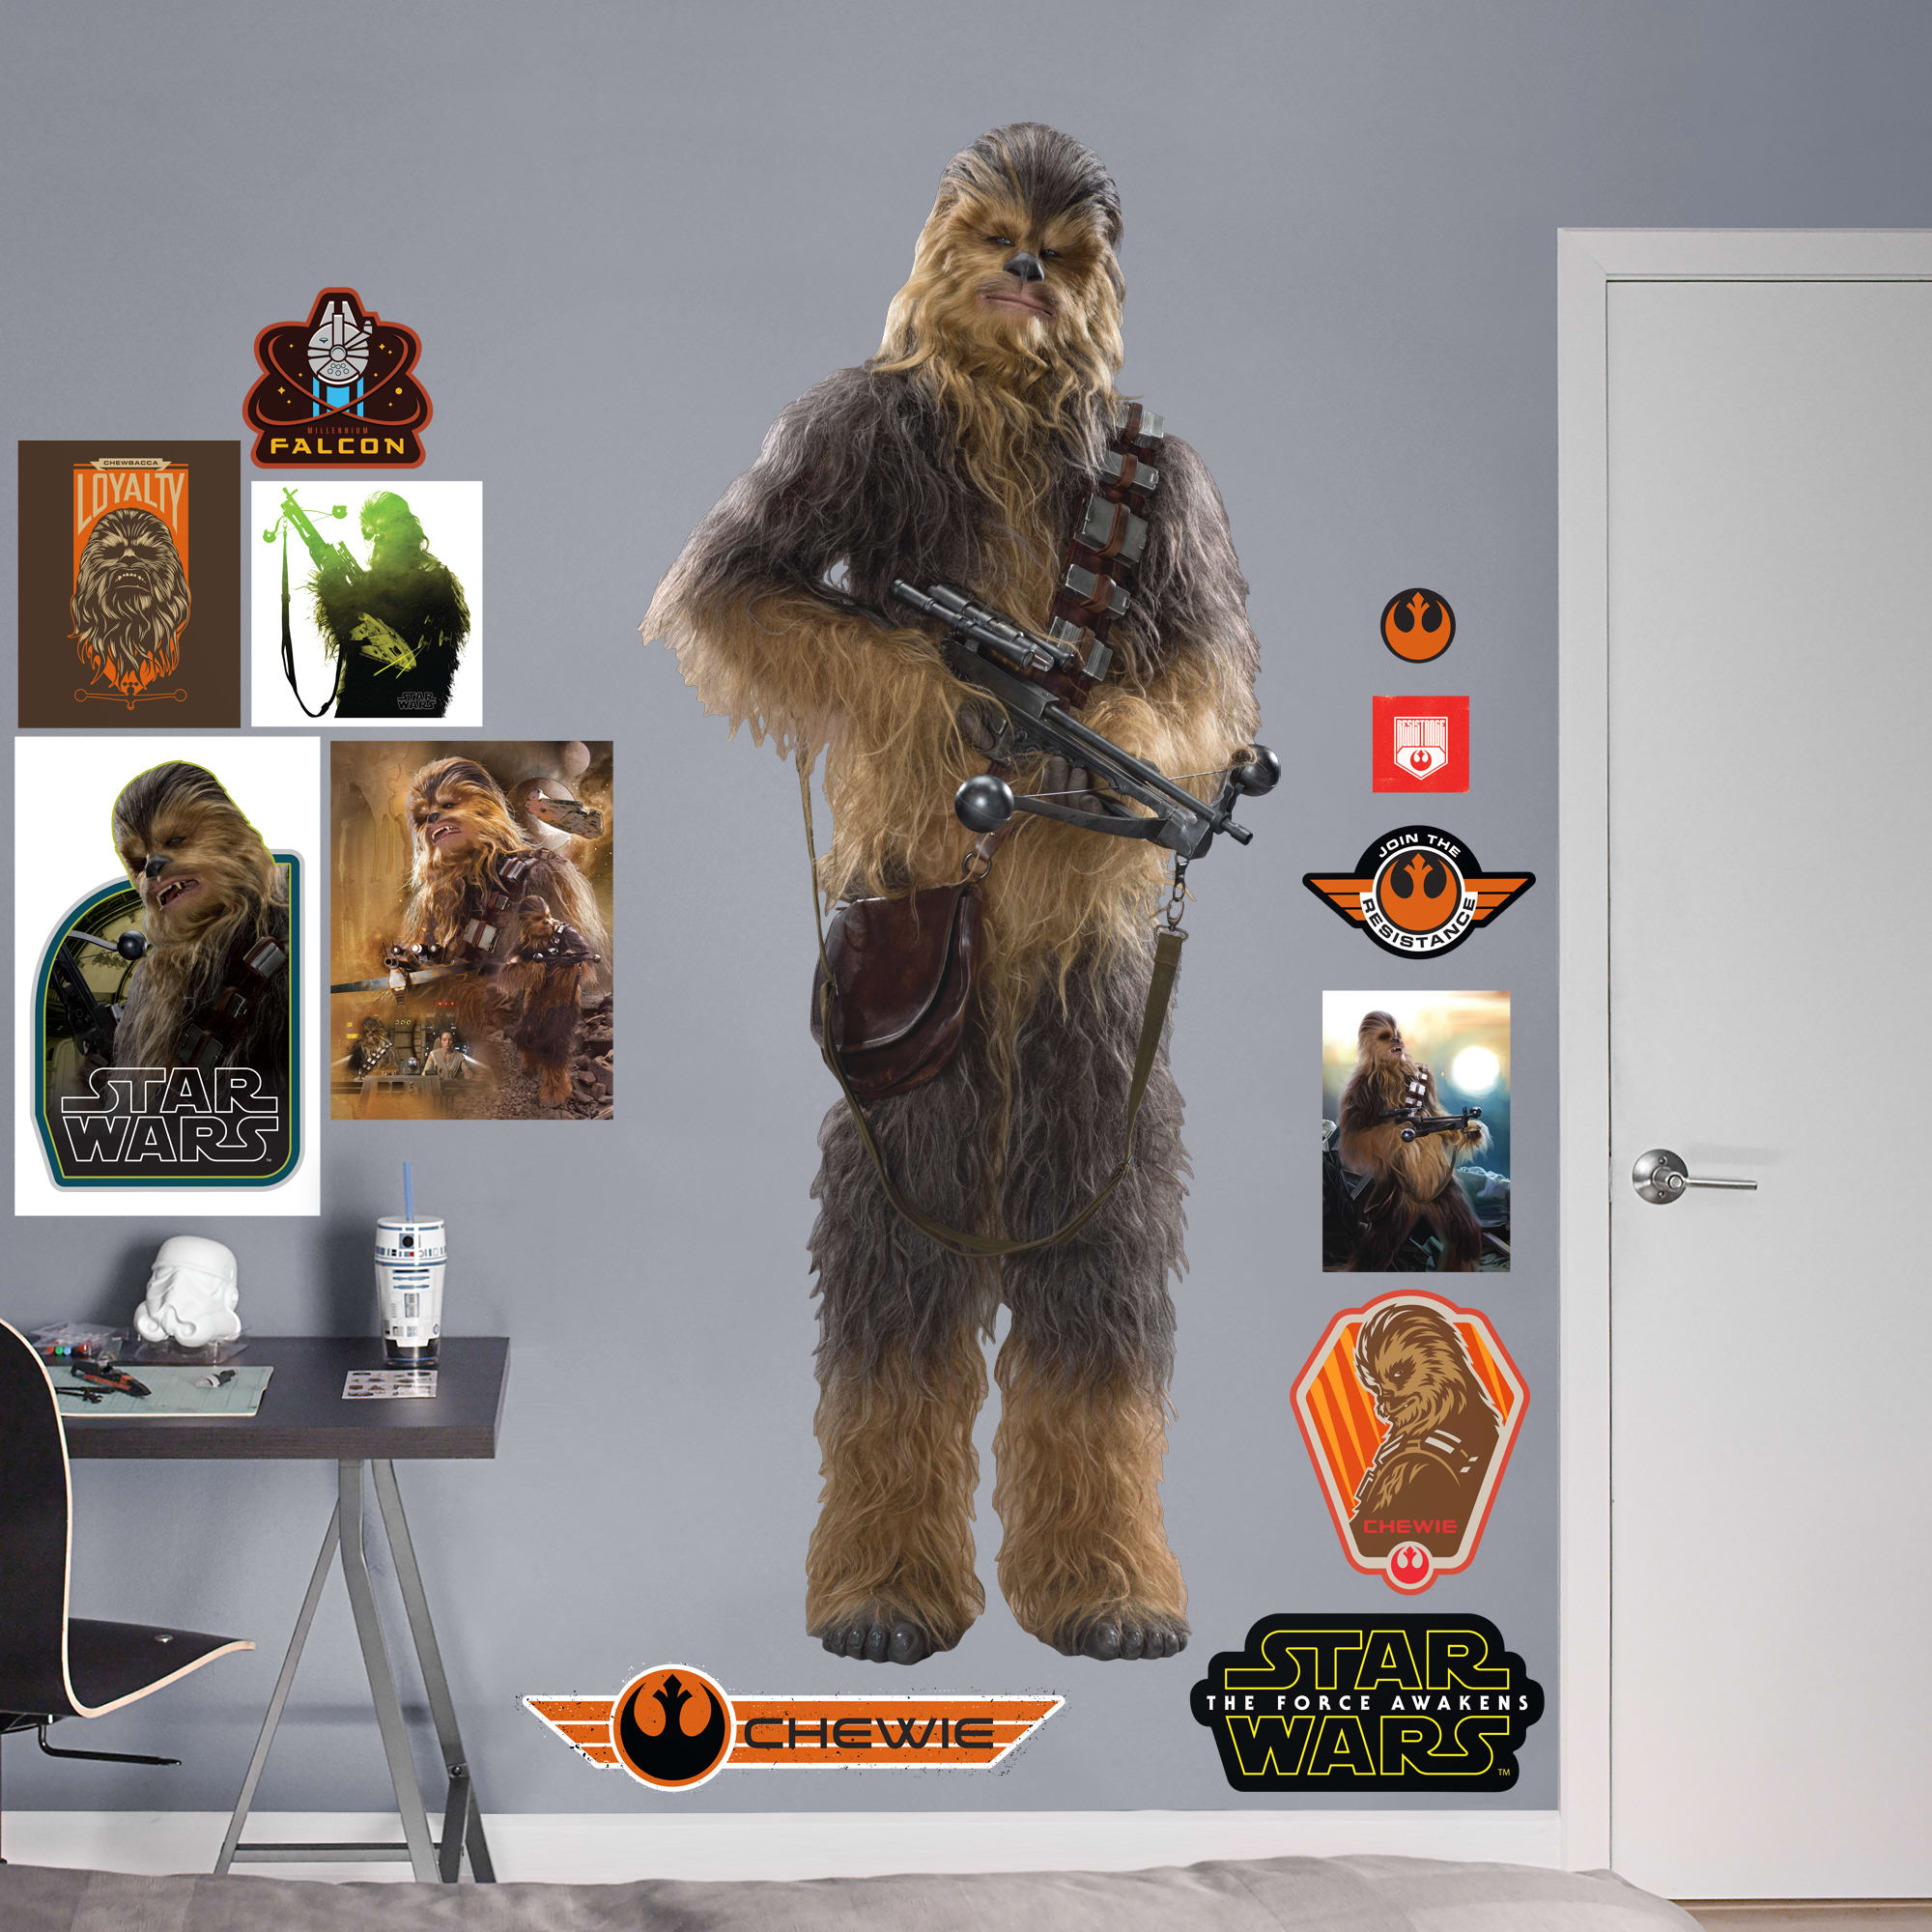 Chewbacca - Star Wars: The Force Awakens - Officially Licensed Removable Wall Decal Life-Size Character + 12 Decals (35"W x 78"H